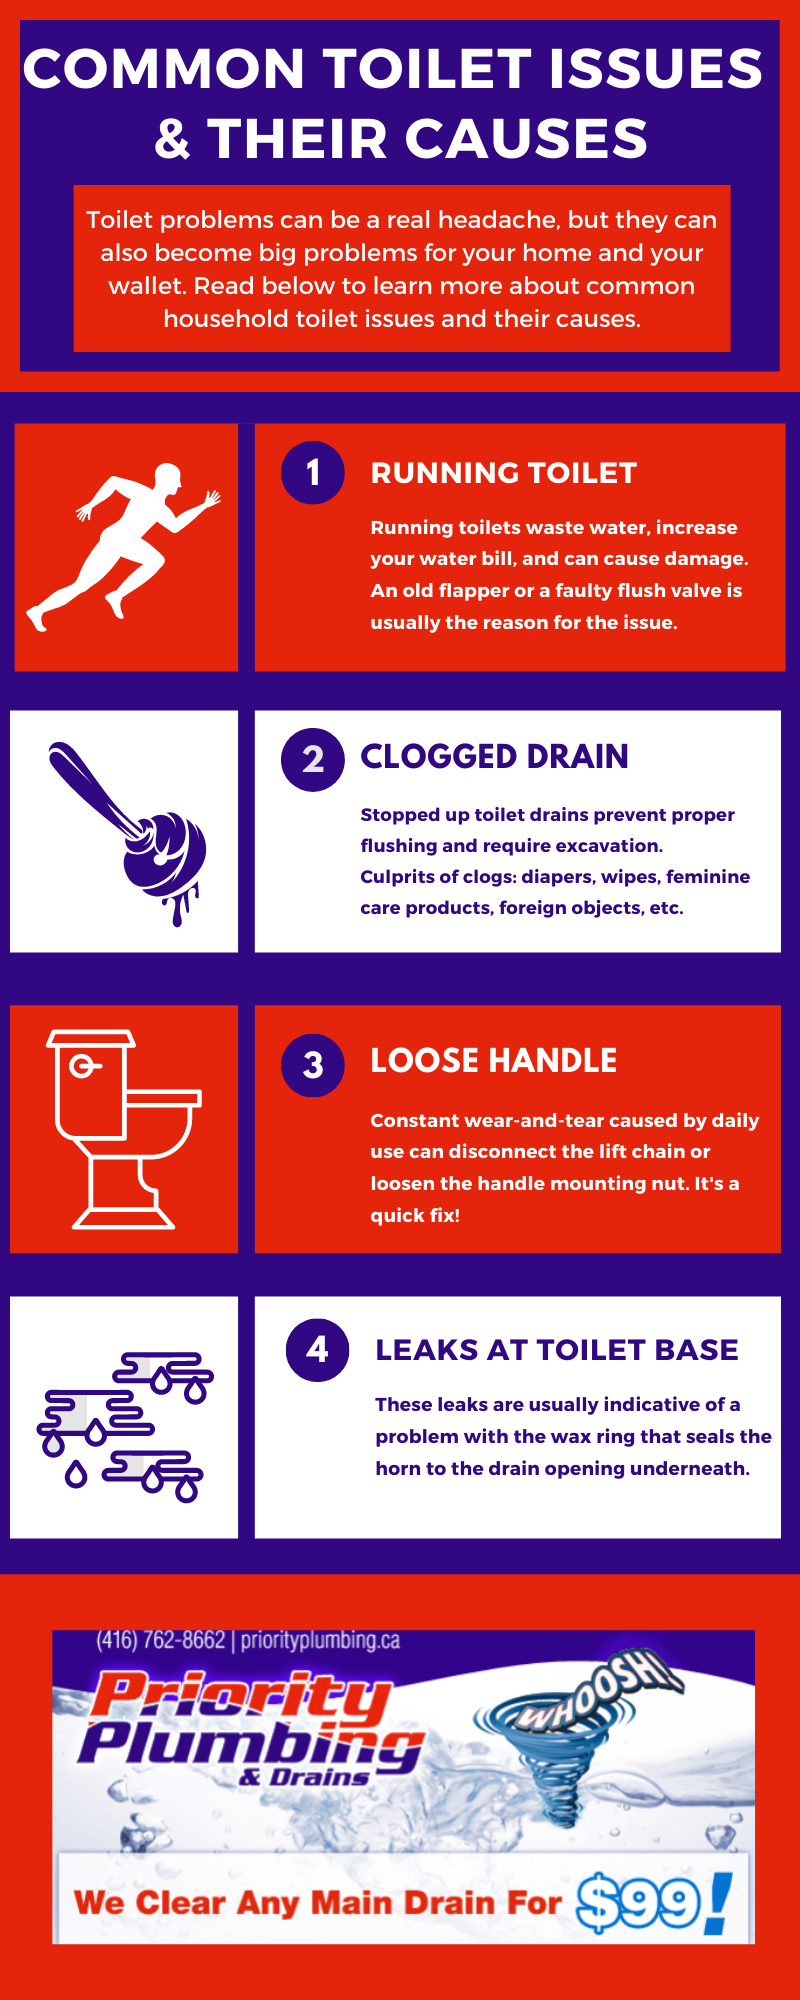 Common Toilet Issues and Their Causes infographic